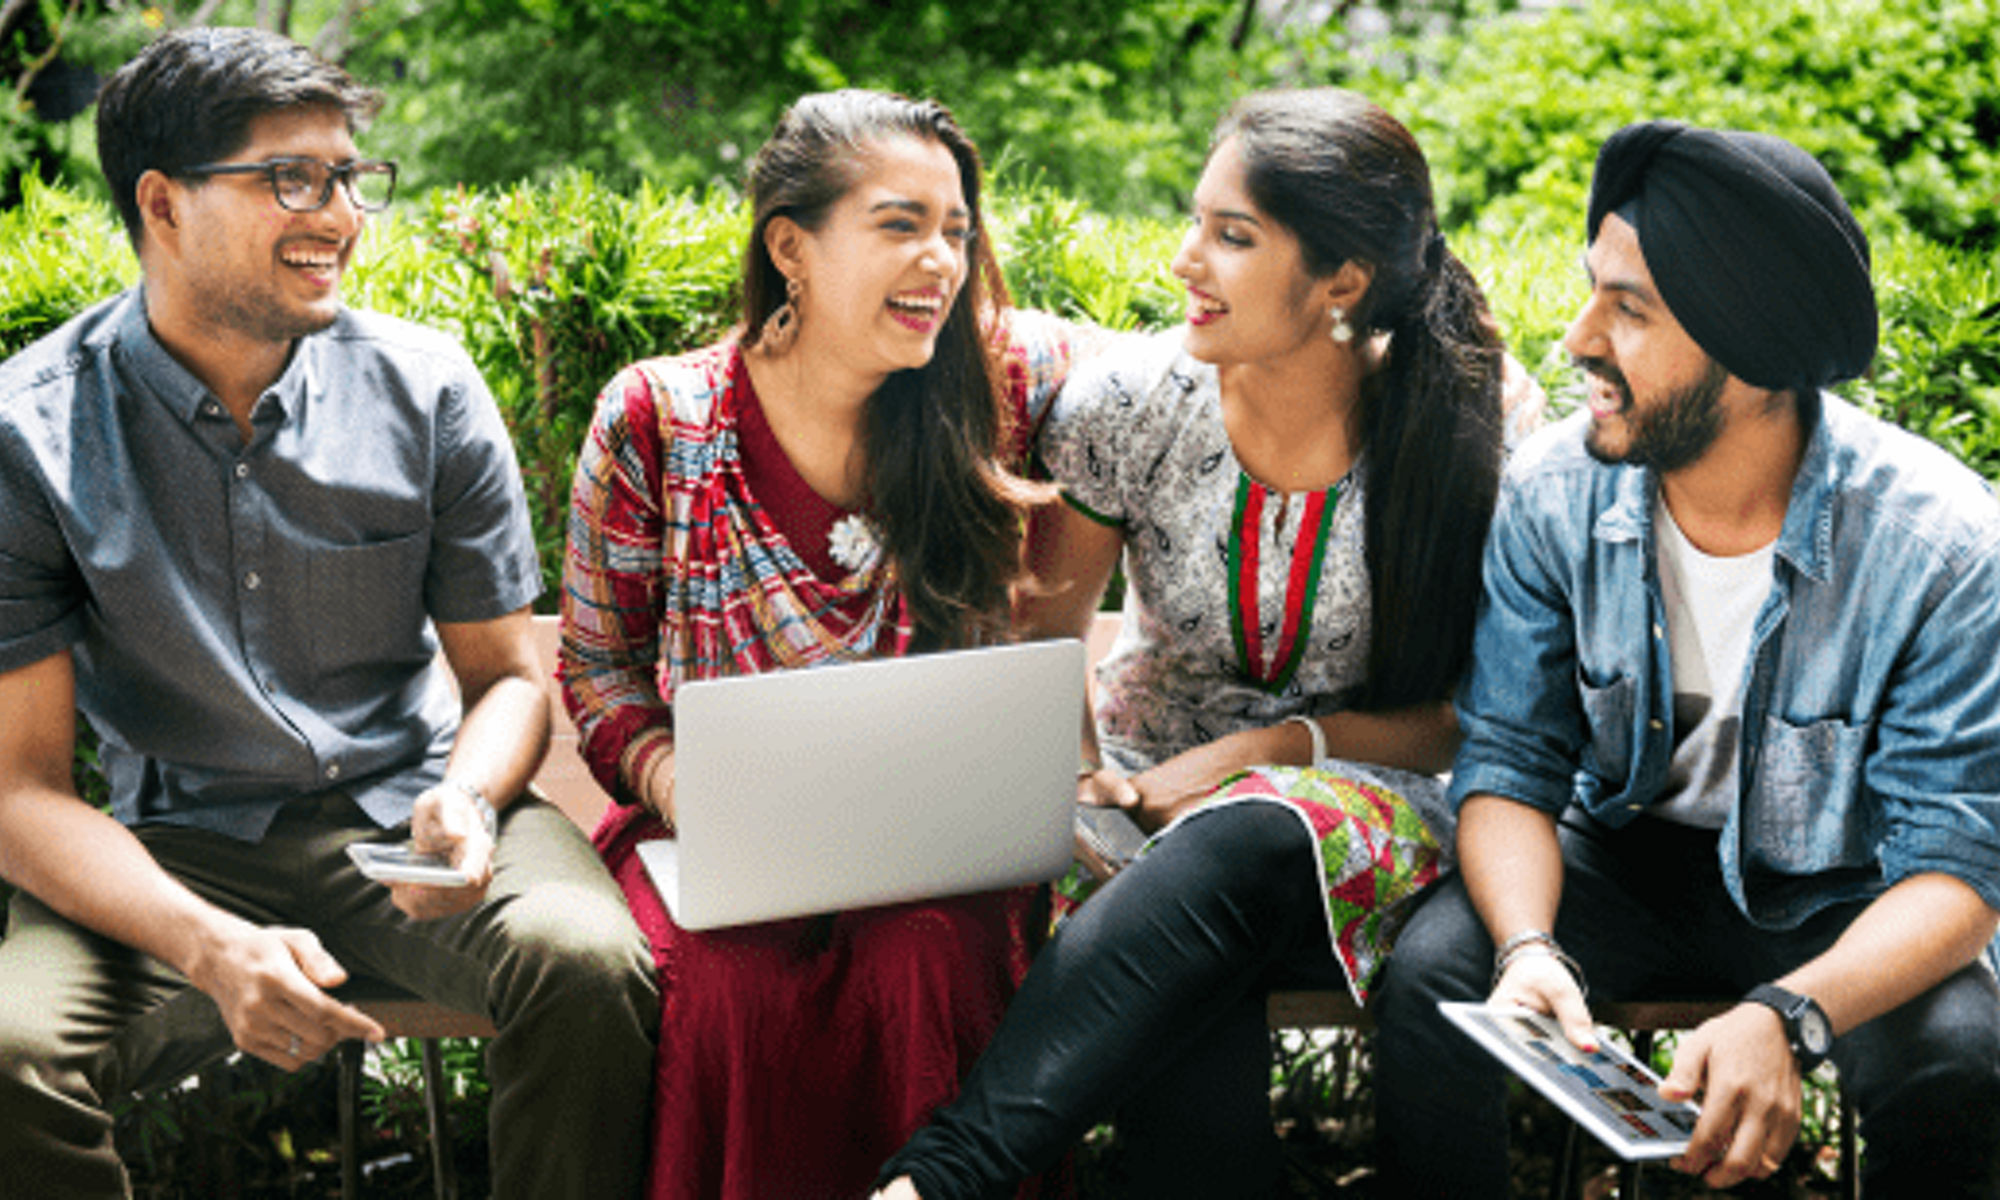 Two male and two female students talking outside holding laptop